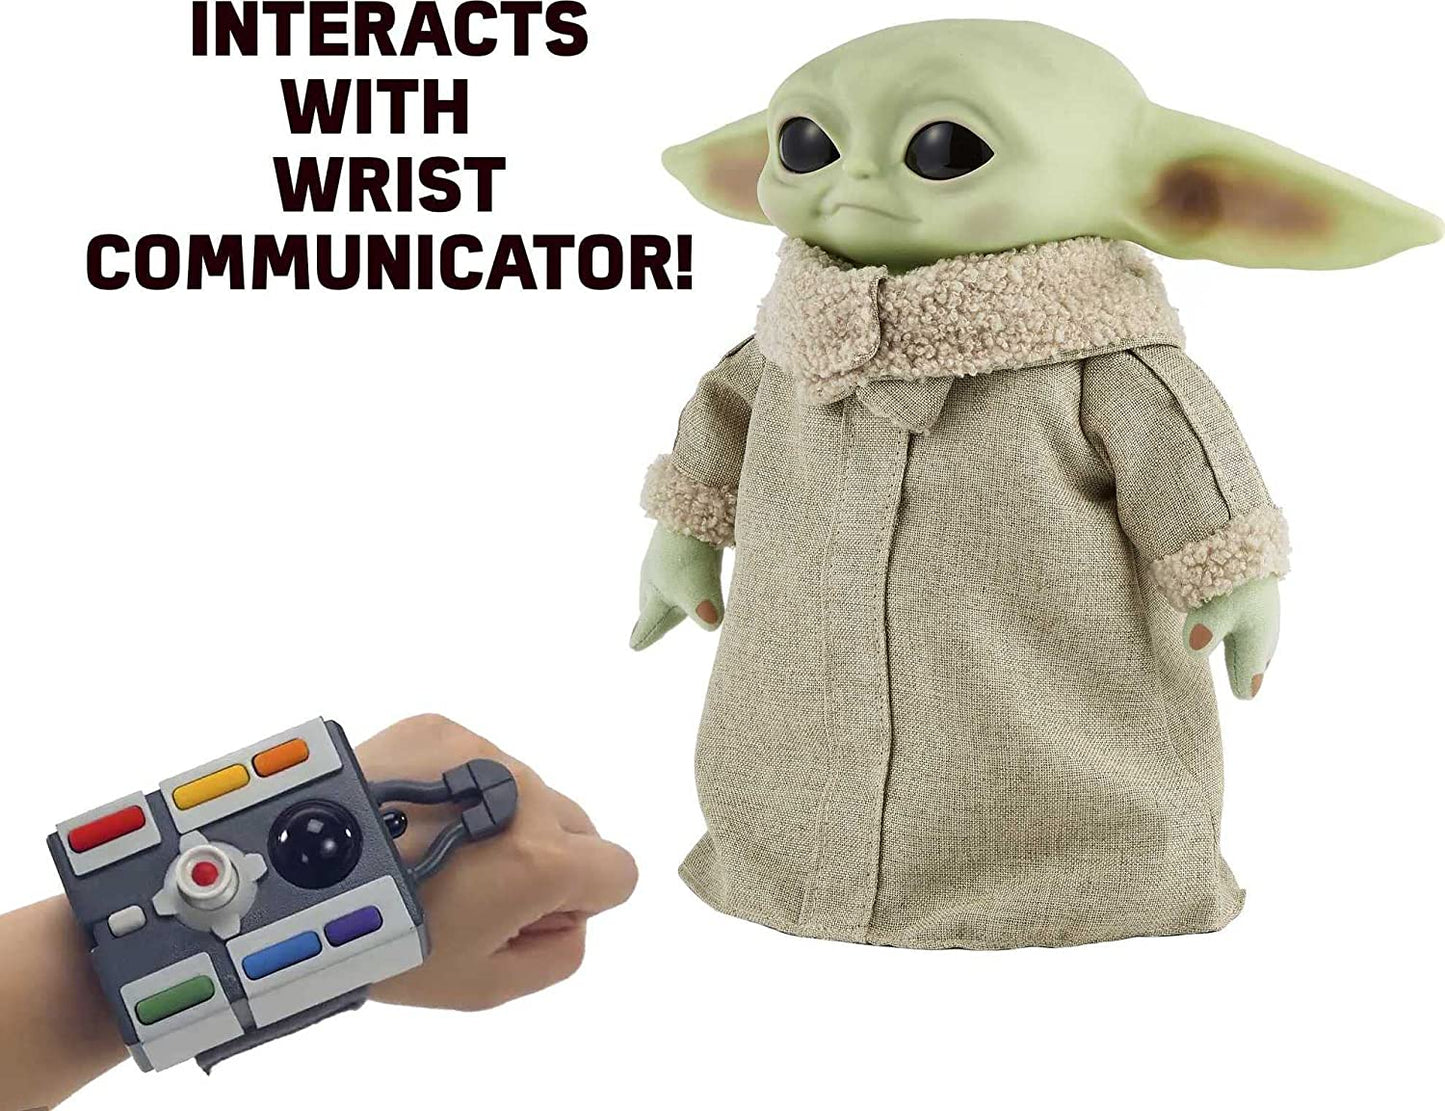 Star Wars RC Grogu Plush Toy, 12-in Soft Body Doll with Remote-Controlled Motion - Open Box